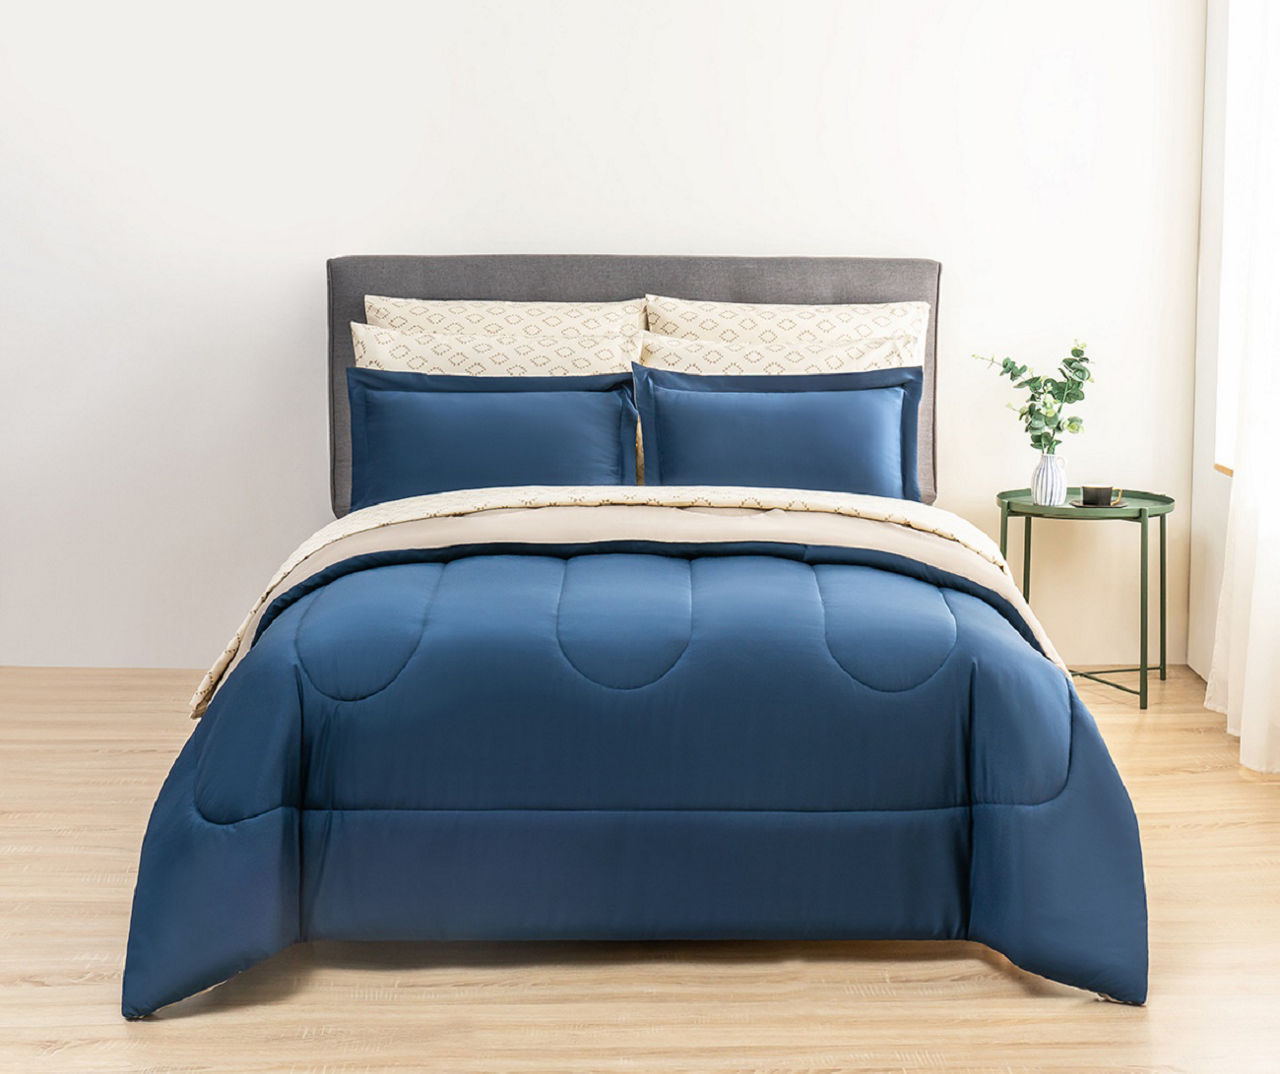 Navy & Tan King 9-Piece Bed-in-a-Bag Set